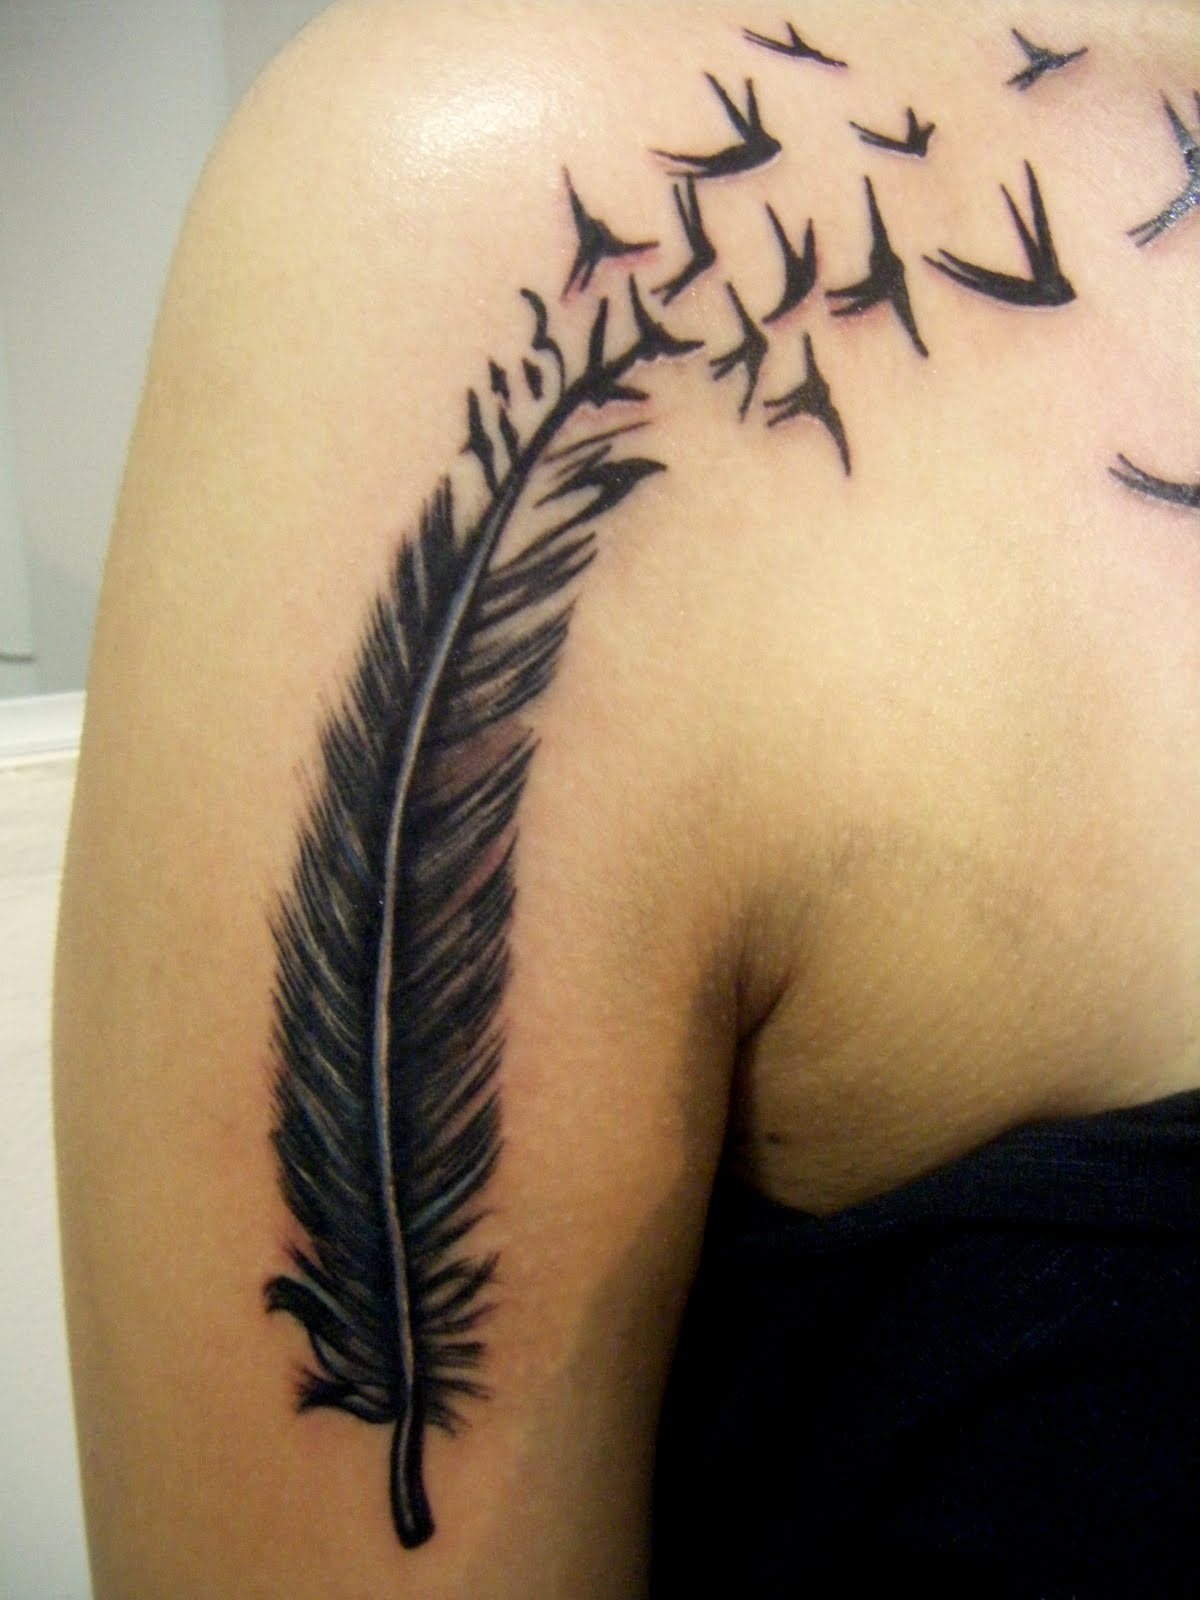 Feather Tattoos Designs Ideas And Meaning Tattoos For You pertaining to dimensions 1200 X 1600